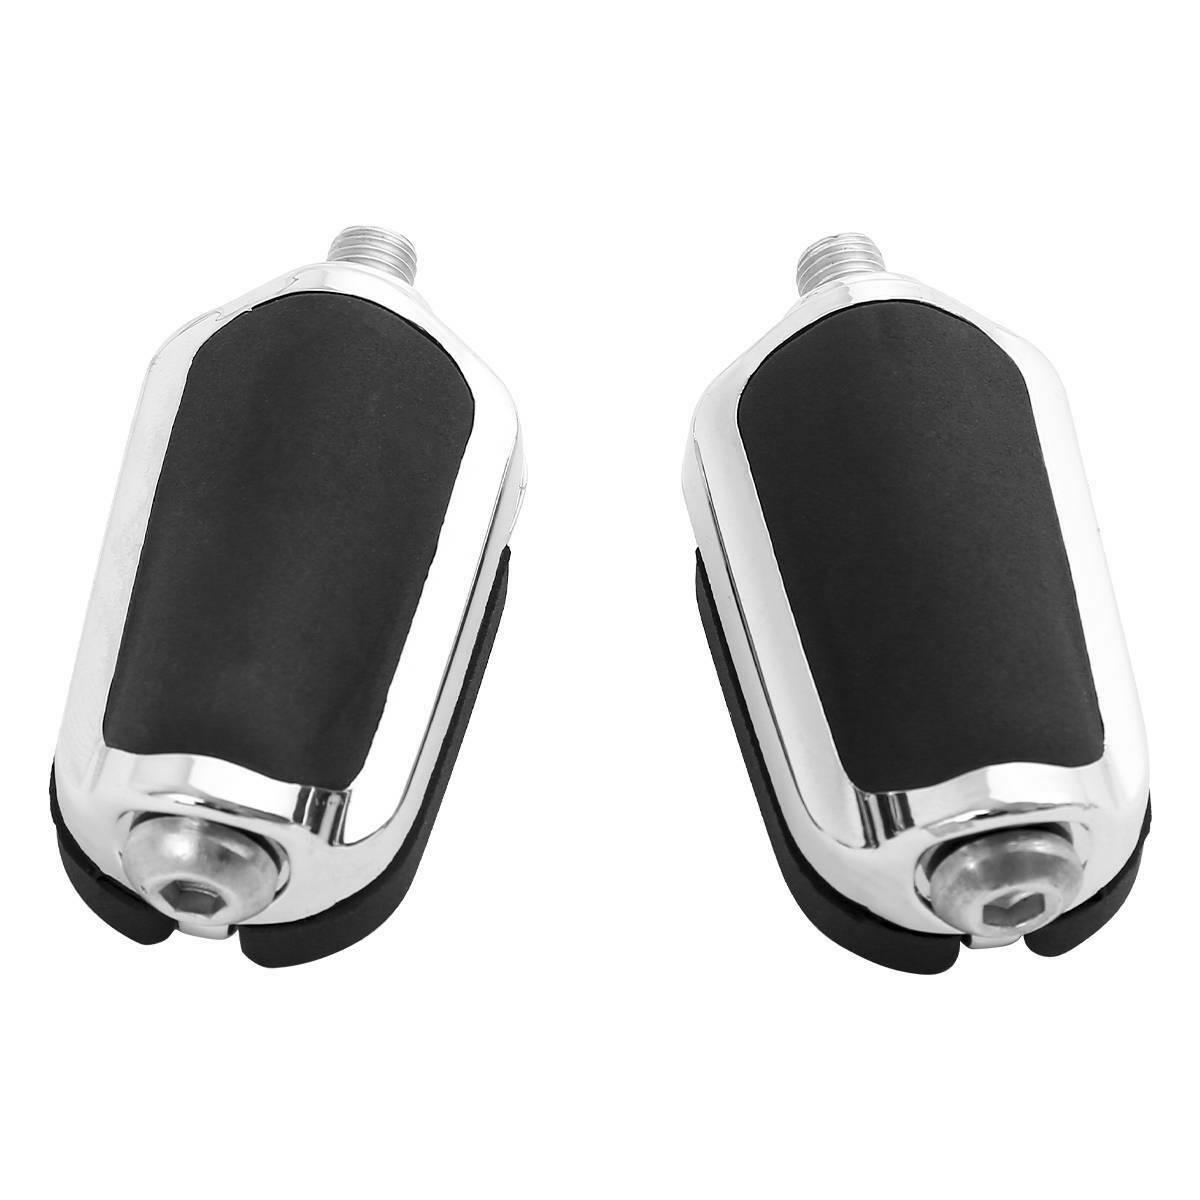 Chrome Shifter Peg Pegs Fit For Harley Electra Road King Street Glide Slipstream - Moto Life Products